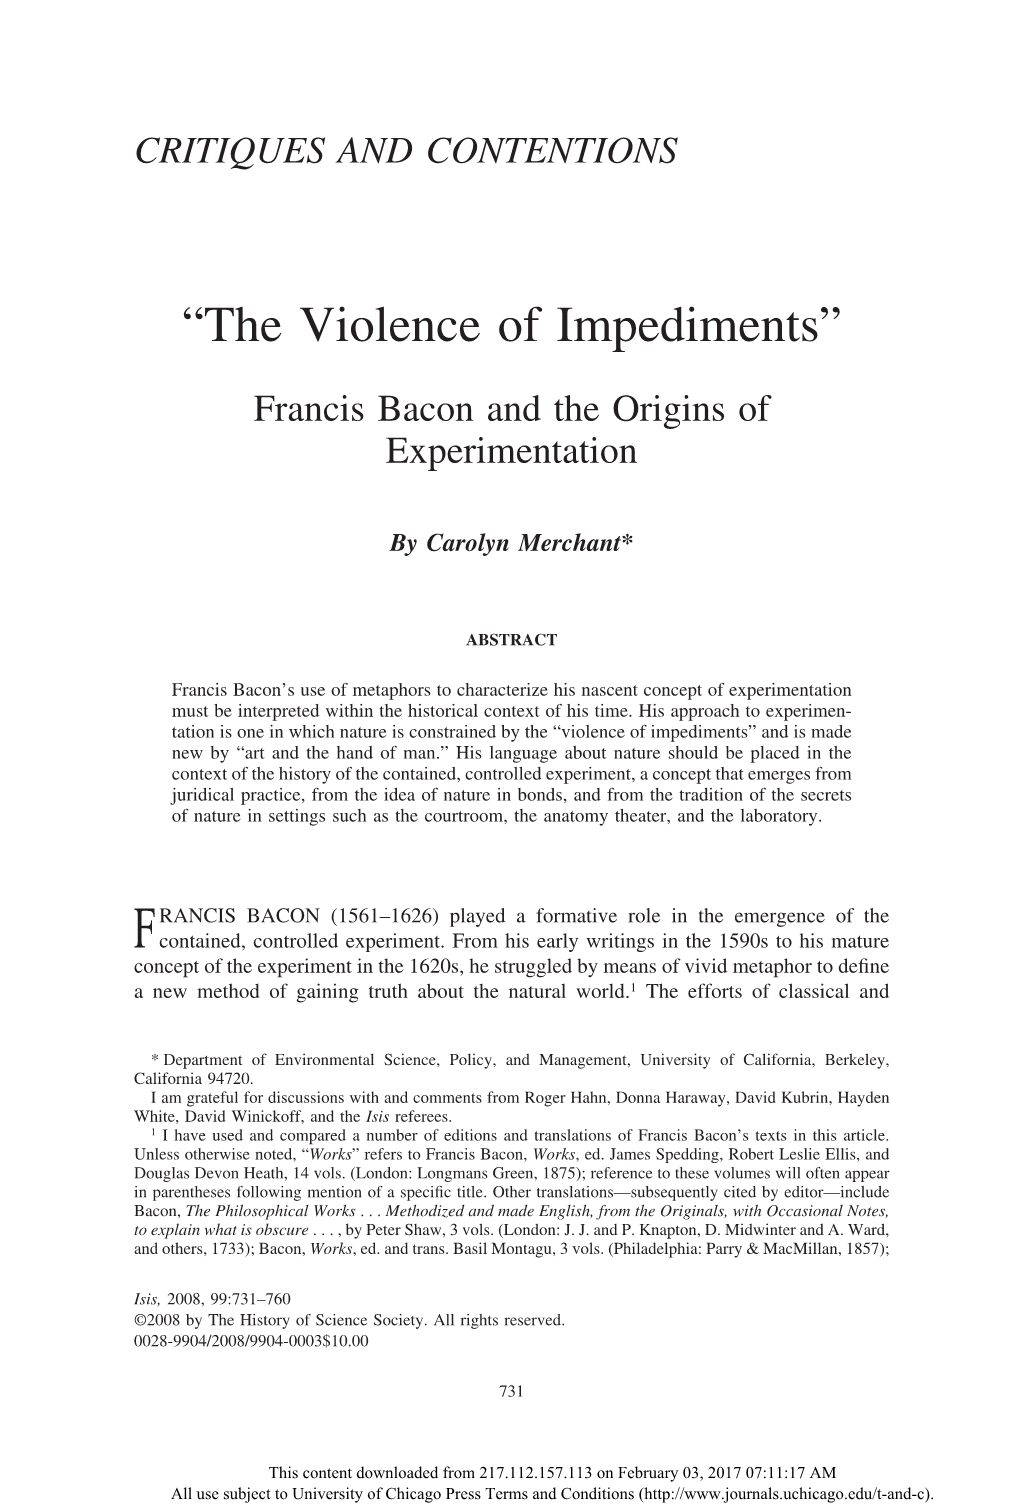 “The Violence of Impediments”: Francis Bacon and the Origins Of